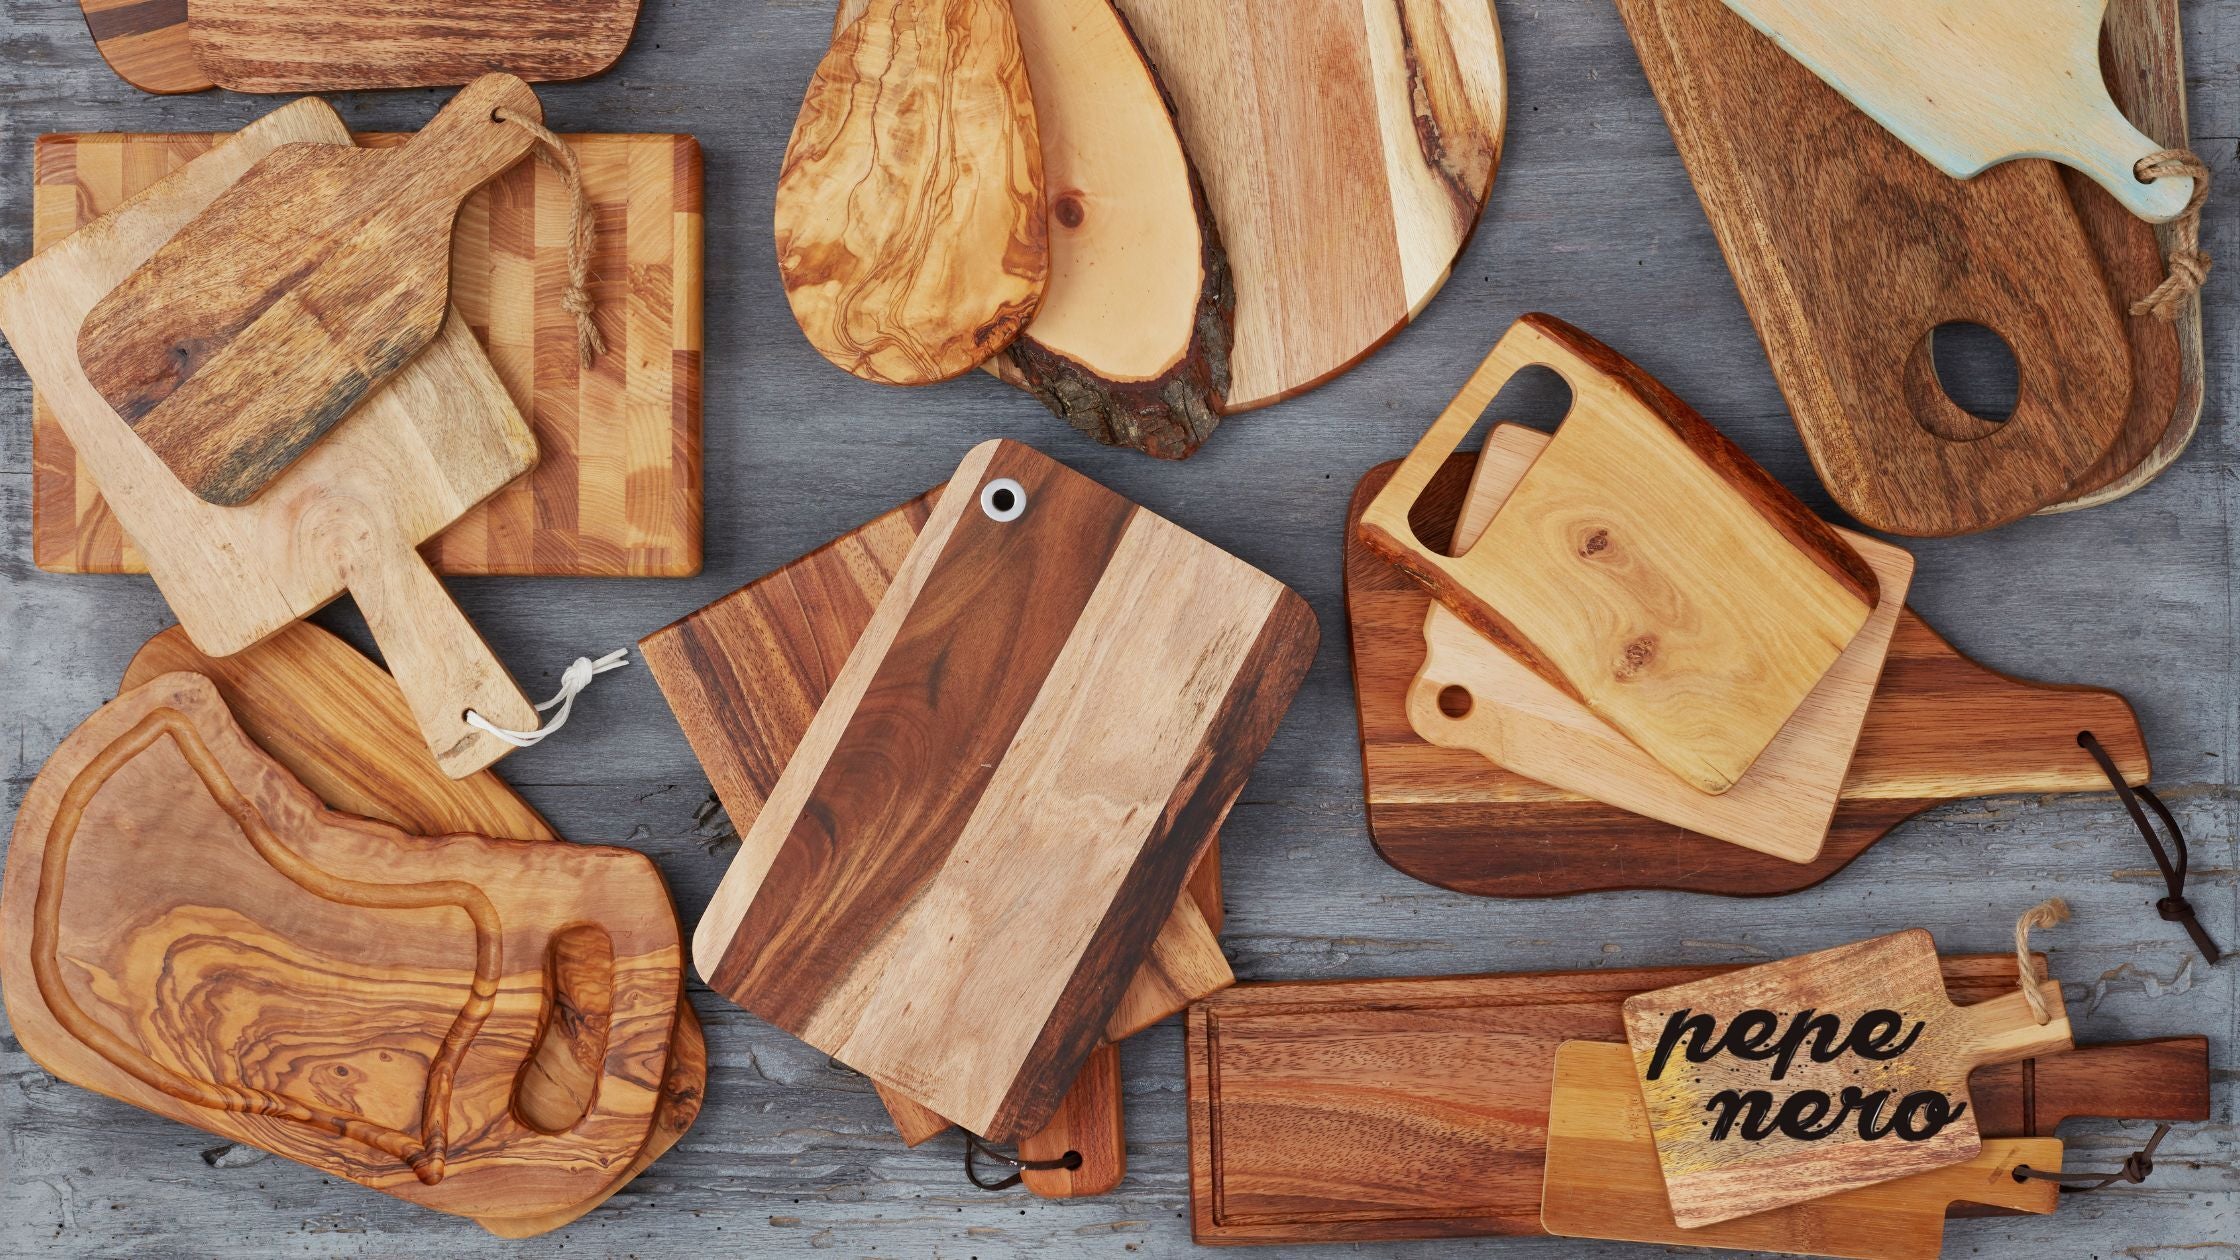 The Best Dishwasher Safe Cutting Boards of 2022